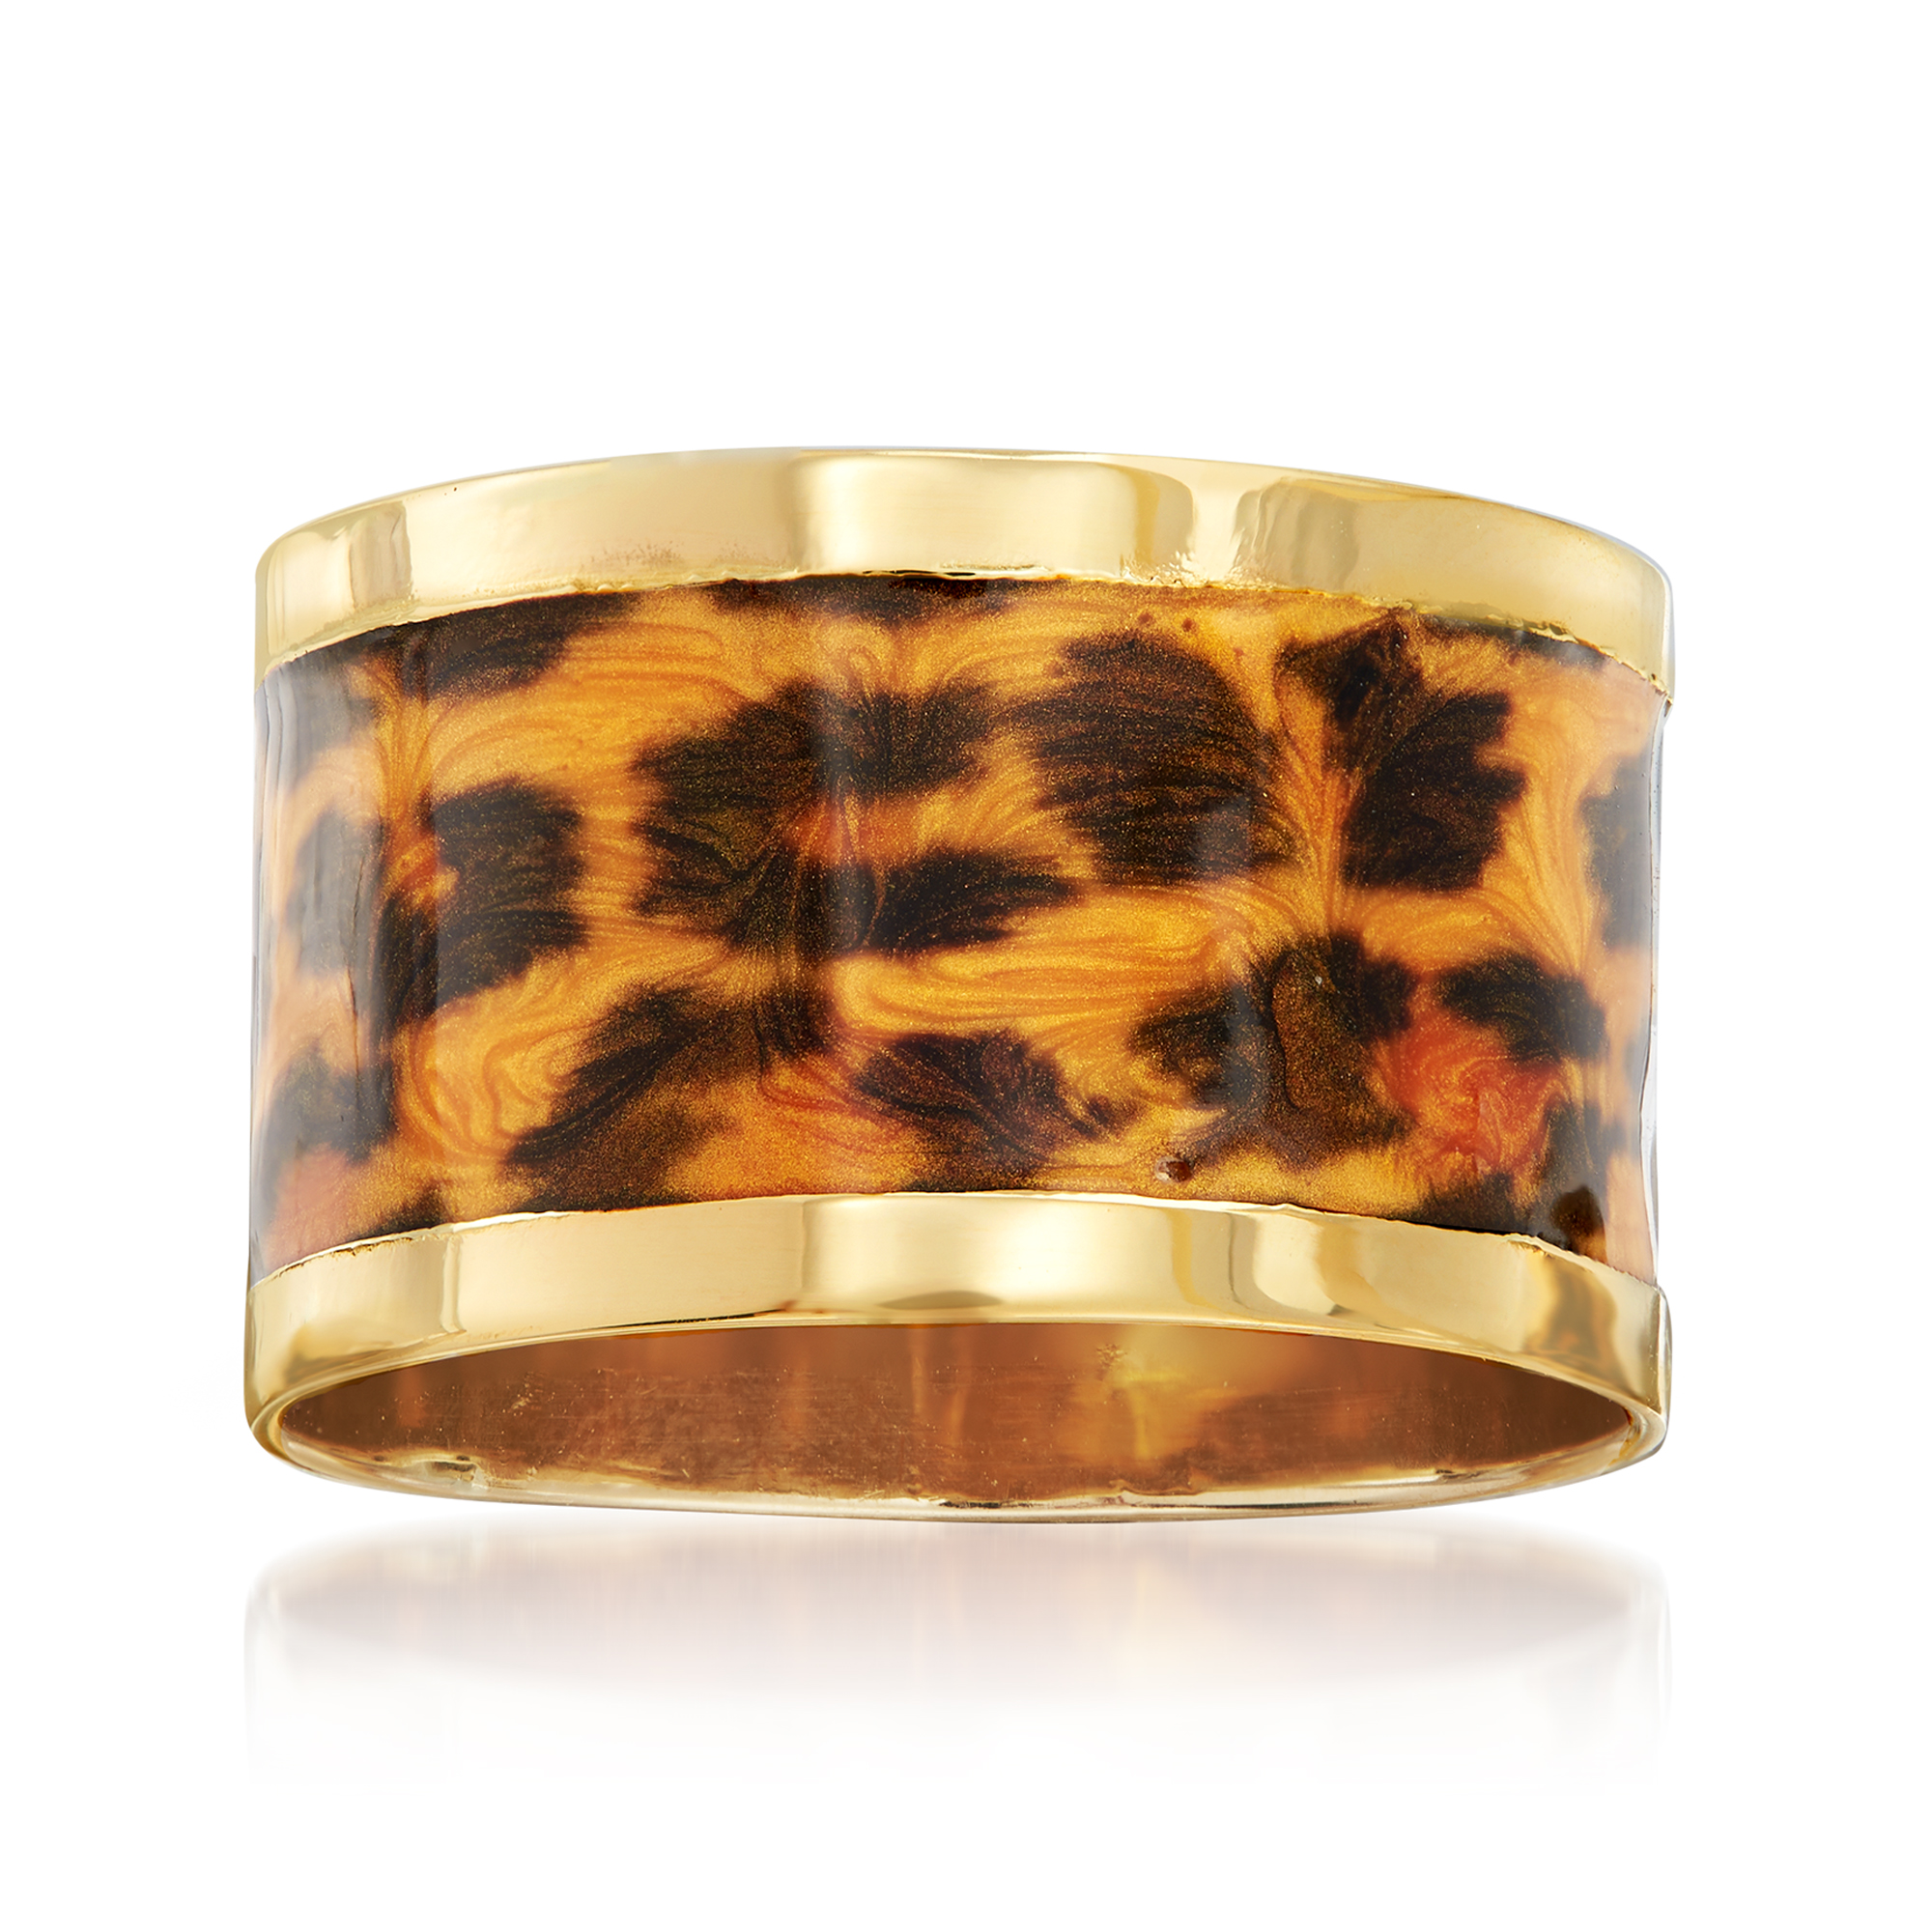 Fred of Paris Gold and Enamel Leopard Ring, Cocktail Ring, Size 4 3/4, Vintage Jewelry